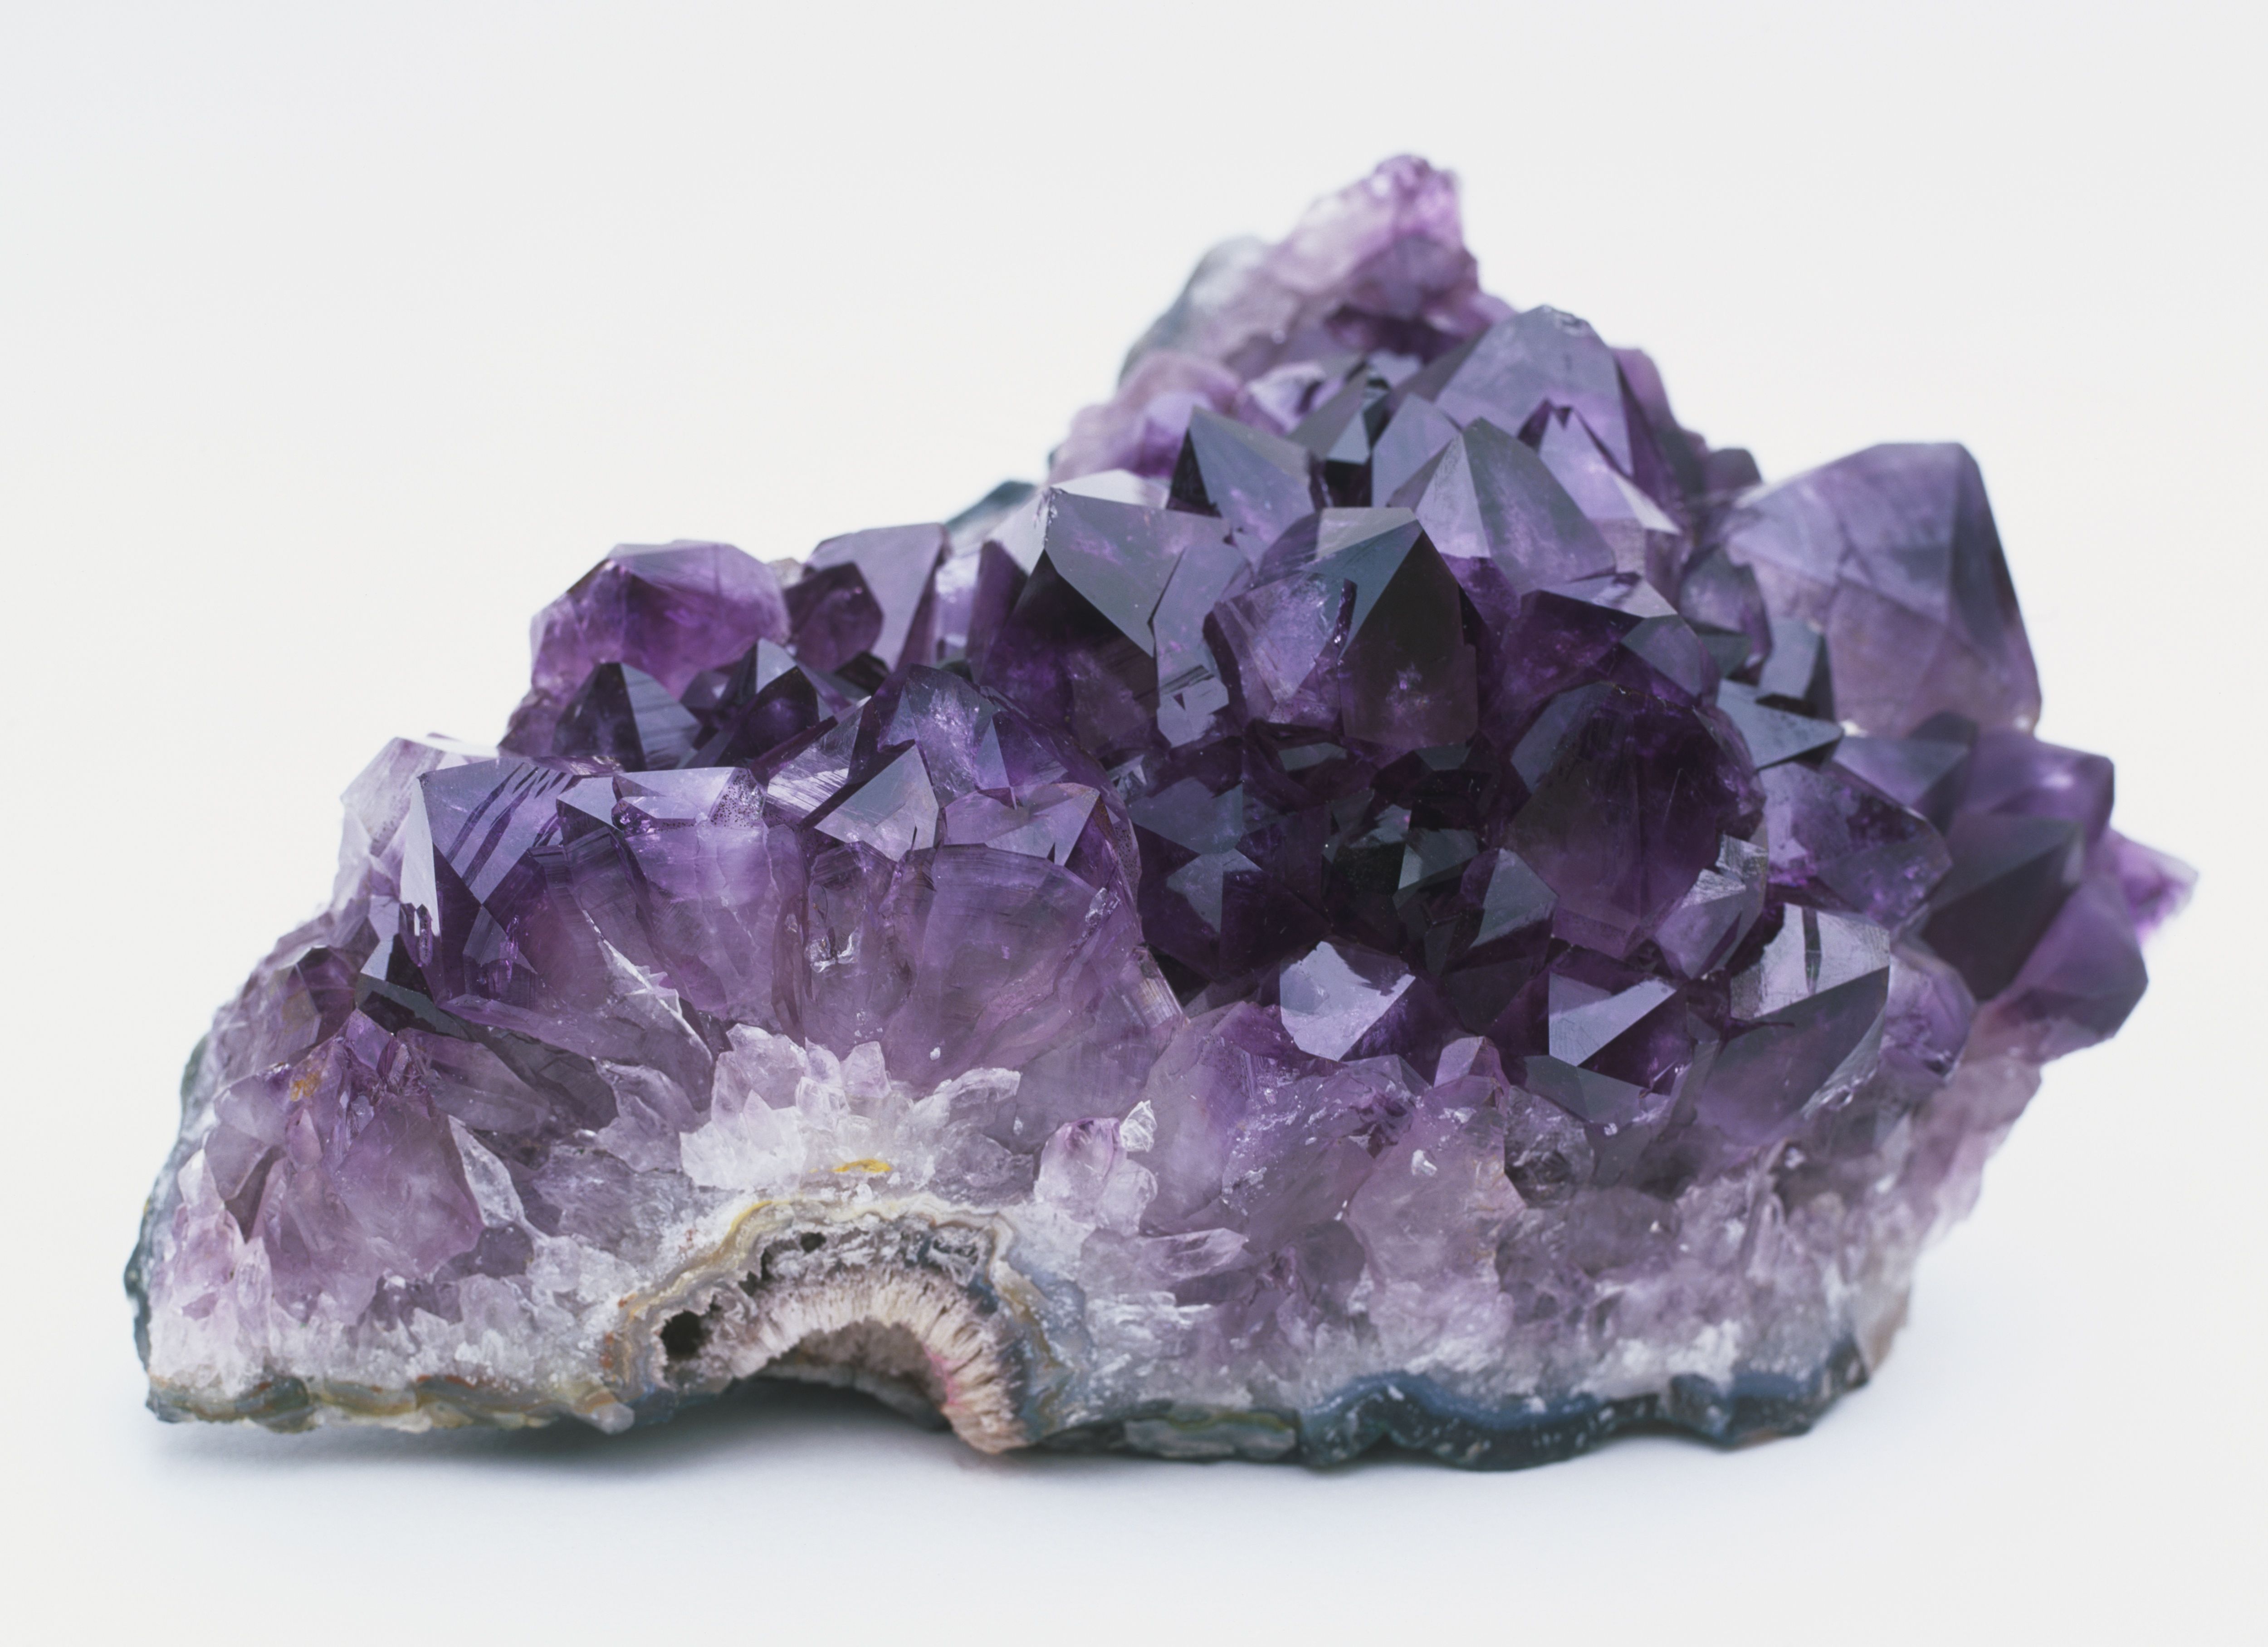 Amethyst Use in Healing, Feng Shui, and Jewelry